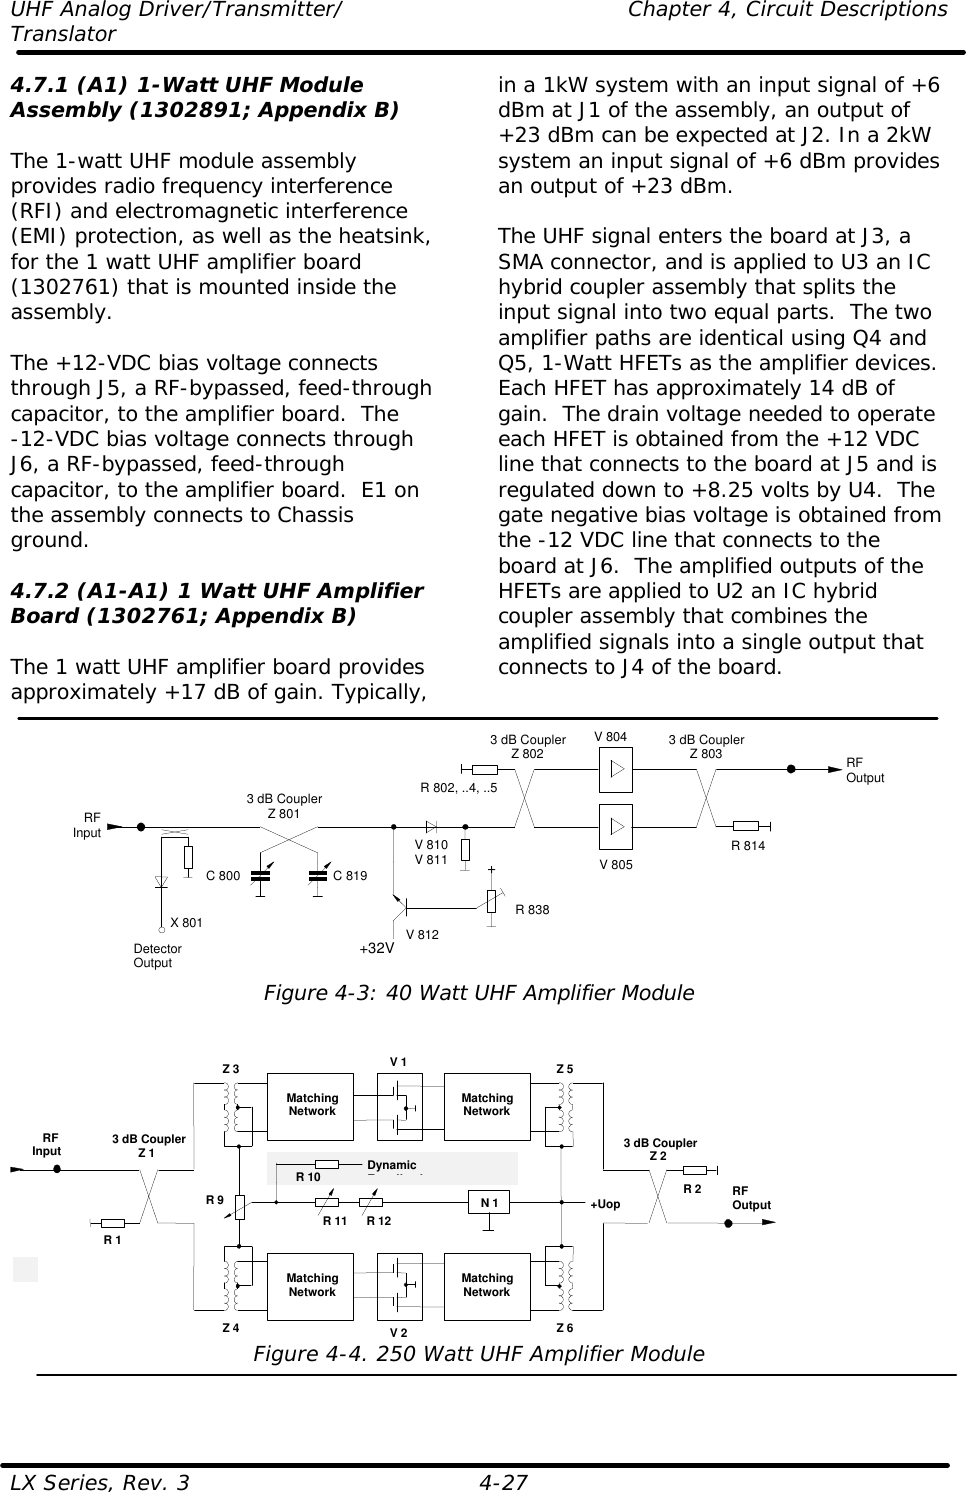 UHF Analog Driver/Transmitter/    Chapter 4, Circuit Descriptions Translator  LX Series, Rev. 3    4-27 4.7.1 (A1) 1-Watt UHF Module Assembly (1302891; Appendix B)  The 1-watt UHF module assembly provides radio frequency interference (RFI) and electromagnetic interference (EMI) protection, as well as the heatsink, for the 1 watt UHF amplifier board (1302761) that is mounted inside the assembly.   The +12-VDC bias voltage connects through J5, a RF-bypassed, feed-through capacitor, to the amplifier board.  The  -12-VDC bias voltage connects through J6, a RF-bypassed, feed-through capacitor, to the amplifier board.  E1 on the assembly connects to Chassis ground.  4.7.2 (A1-A1) 1 Watt UHF Amplifier Board (1302761; Appendix B)  The 1 watt UHF amplifier board provides approximately +17 dB of gain. Typically, in a 1kW system with an input signal of +6 dBm at J1 of the assembly, an output of +23 dBm can be expected at J2. In a 2kW system an input signal of +6 dBm provides an output of +23 dBm.  The UHF signal enters the board at J3, a SMA connector, and is applied to U3 an IC hybrid coupler assembly that splits the input signal into two equal parts.  The two amplifier paths are identical using Q4 and Q5, 1-Watt HFETs as the amplifier devices.  Each HFET has approximately 14 dB of gain.  The drain voltage needed to operate each HFET is obtained from the +12 VDC line that connects to the board at J5 and is regulated down to +8.25 volts by U4.  The gate negative bias voltage is obtained from the -12 VDC line that connects to the board at J6.  The amplified outputs of the HFETs are applied to U2 an IC hybrid coupler assembly that combines the amplified signals into a single output that connects to J4 of the board.  V 805V 8043 dB CouplerZ 801RFOutputRFInput R 814R 802, ..4, ..5C 800 C 819DetectorOutputX 801+32V+R 838V 810V 811V 8123 dB CouplerZ 802 3 dB CouplerZ 803 Figure 4-3: 40 Watt UHF Amplifier Module   V 13 dB CouplerZ 2RFOutputRFInput3 dB CouplerZ 1R 2R 1MatchingNetworkMatchingNetworkV 2MatchingNetworkMatchingNetworkZ 3 Z 5Z 4 Z 6+UopN 1R 11 R 12R 9R 10 DynamicEqualization Figure 4-4. 250 Watt UHF Amplifier Module  